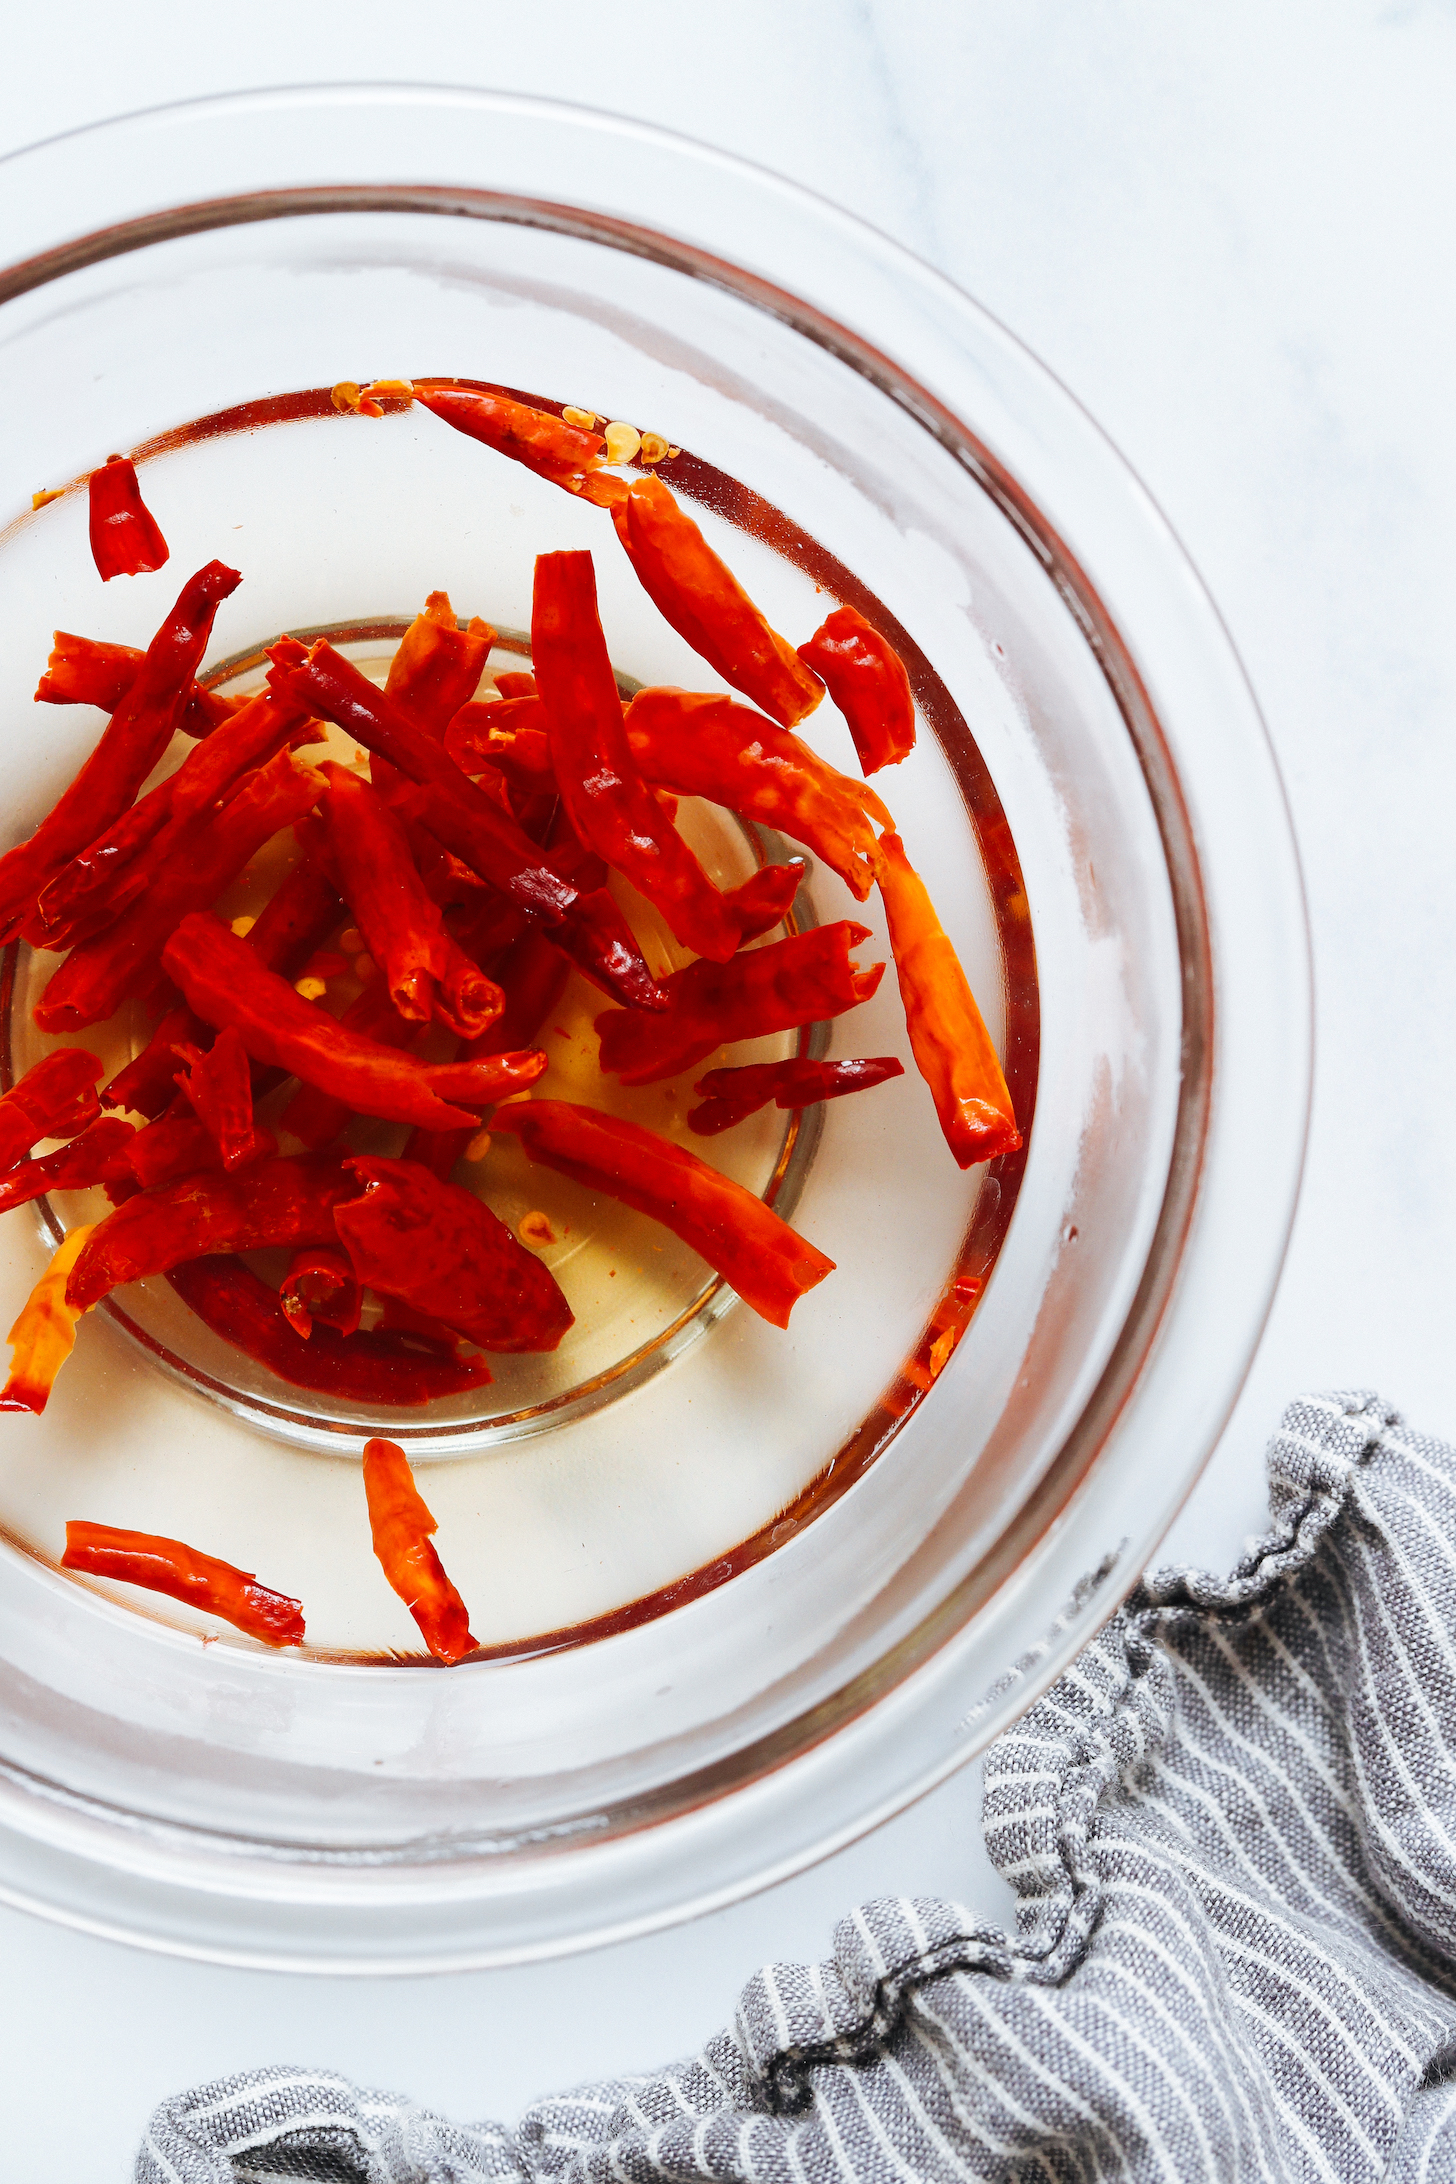 Soaking dried Thai chili peppers in hot water